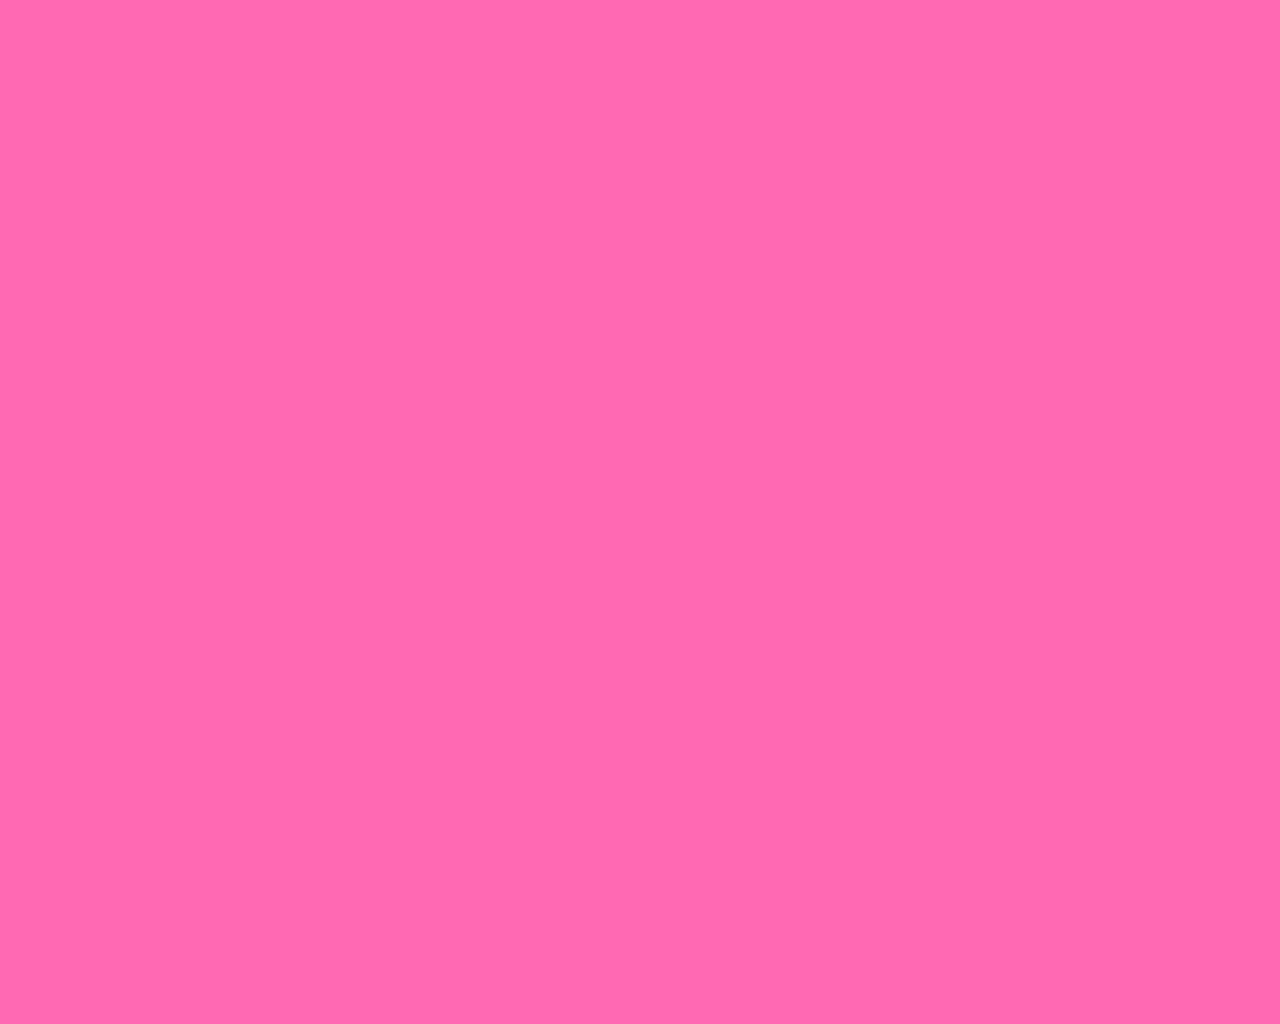 Hot Pink Solid Color Backgrounds Images Pictures   Becuo